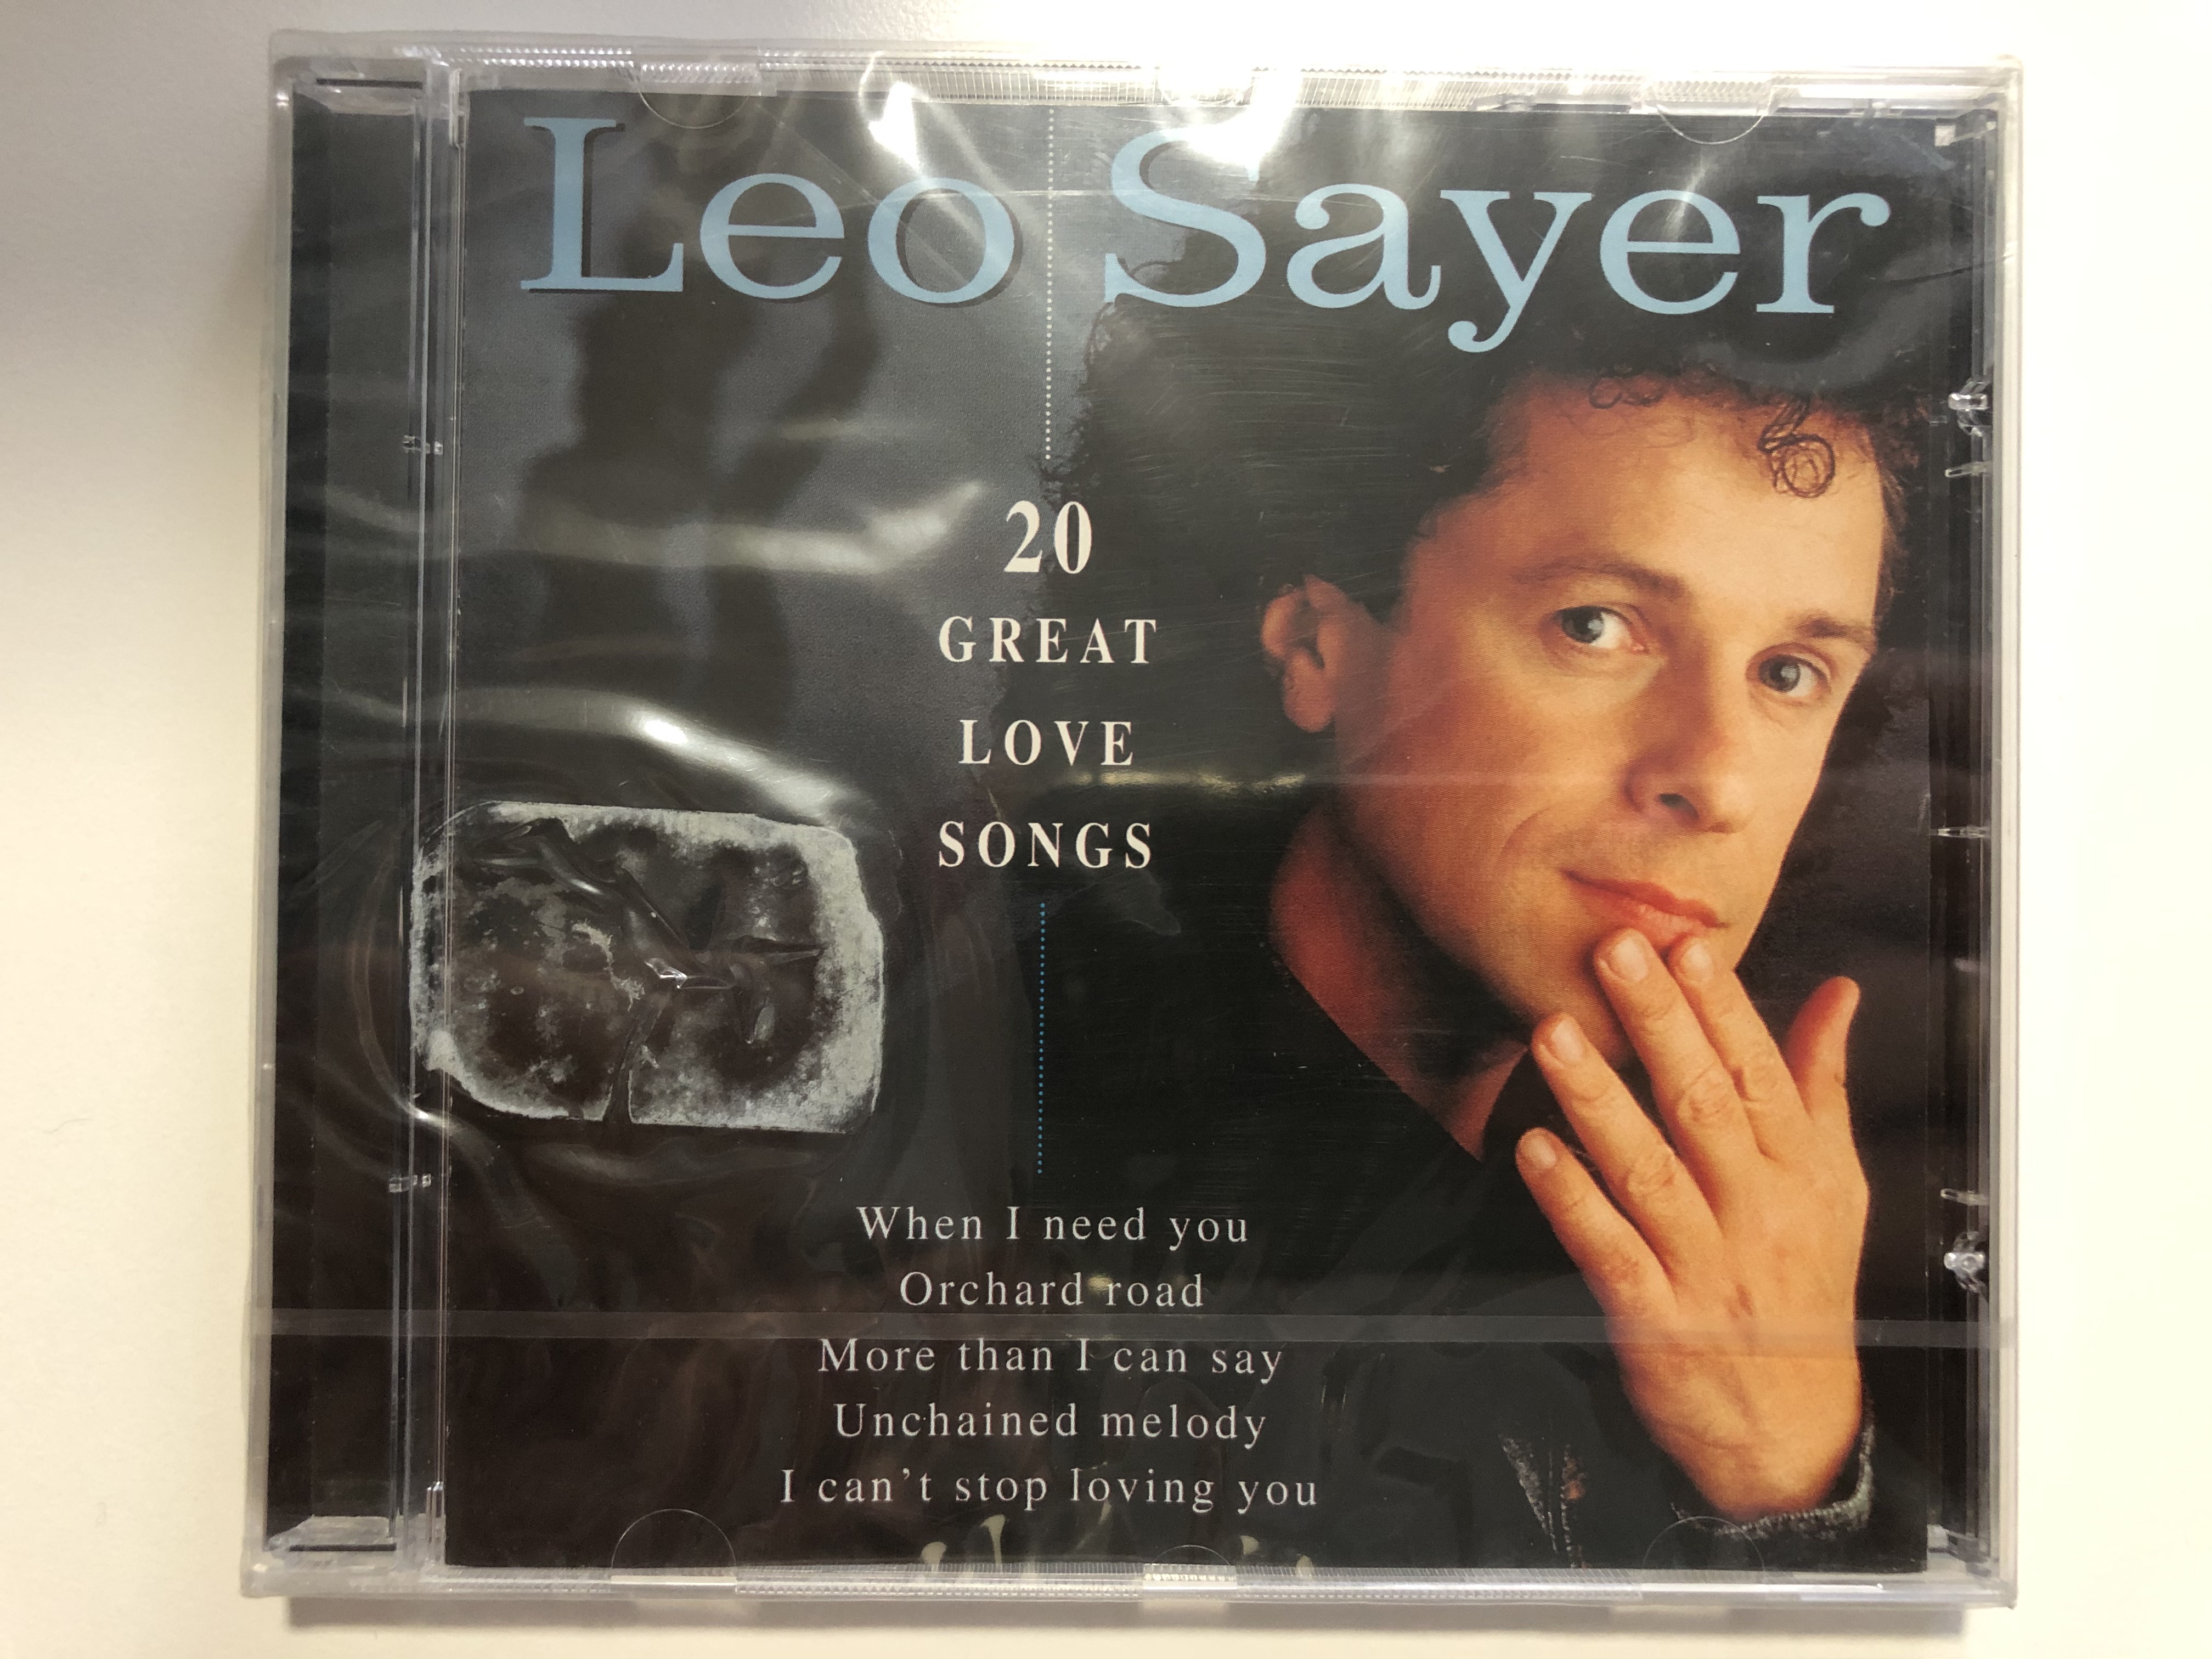 leo-sayer-20-great-love-songs-when-i-need-you-orchard-road-more-than-i-can-say-unchained-melody-i-can-t-stop-loving-you-disky-audio-cd-1996-ls-870582-1-.jpg